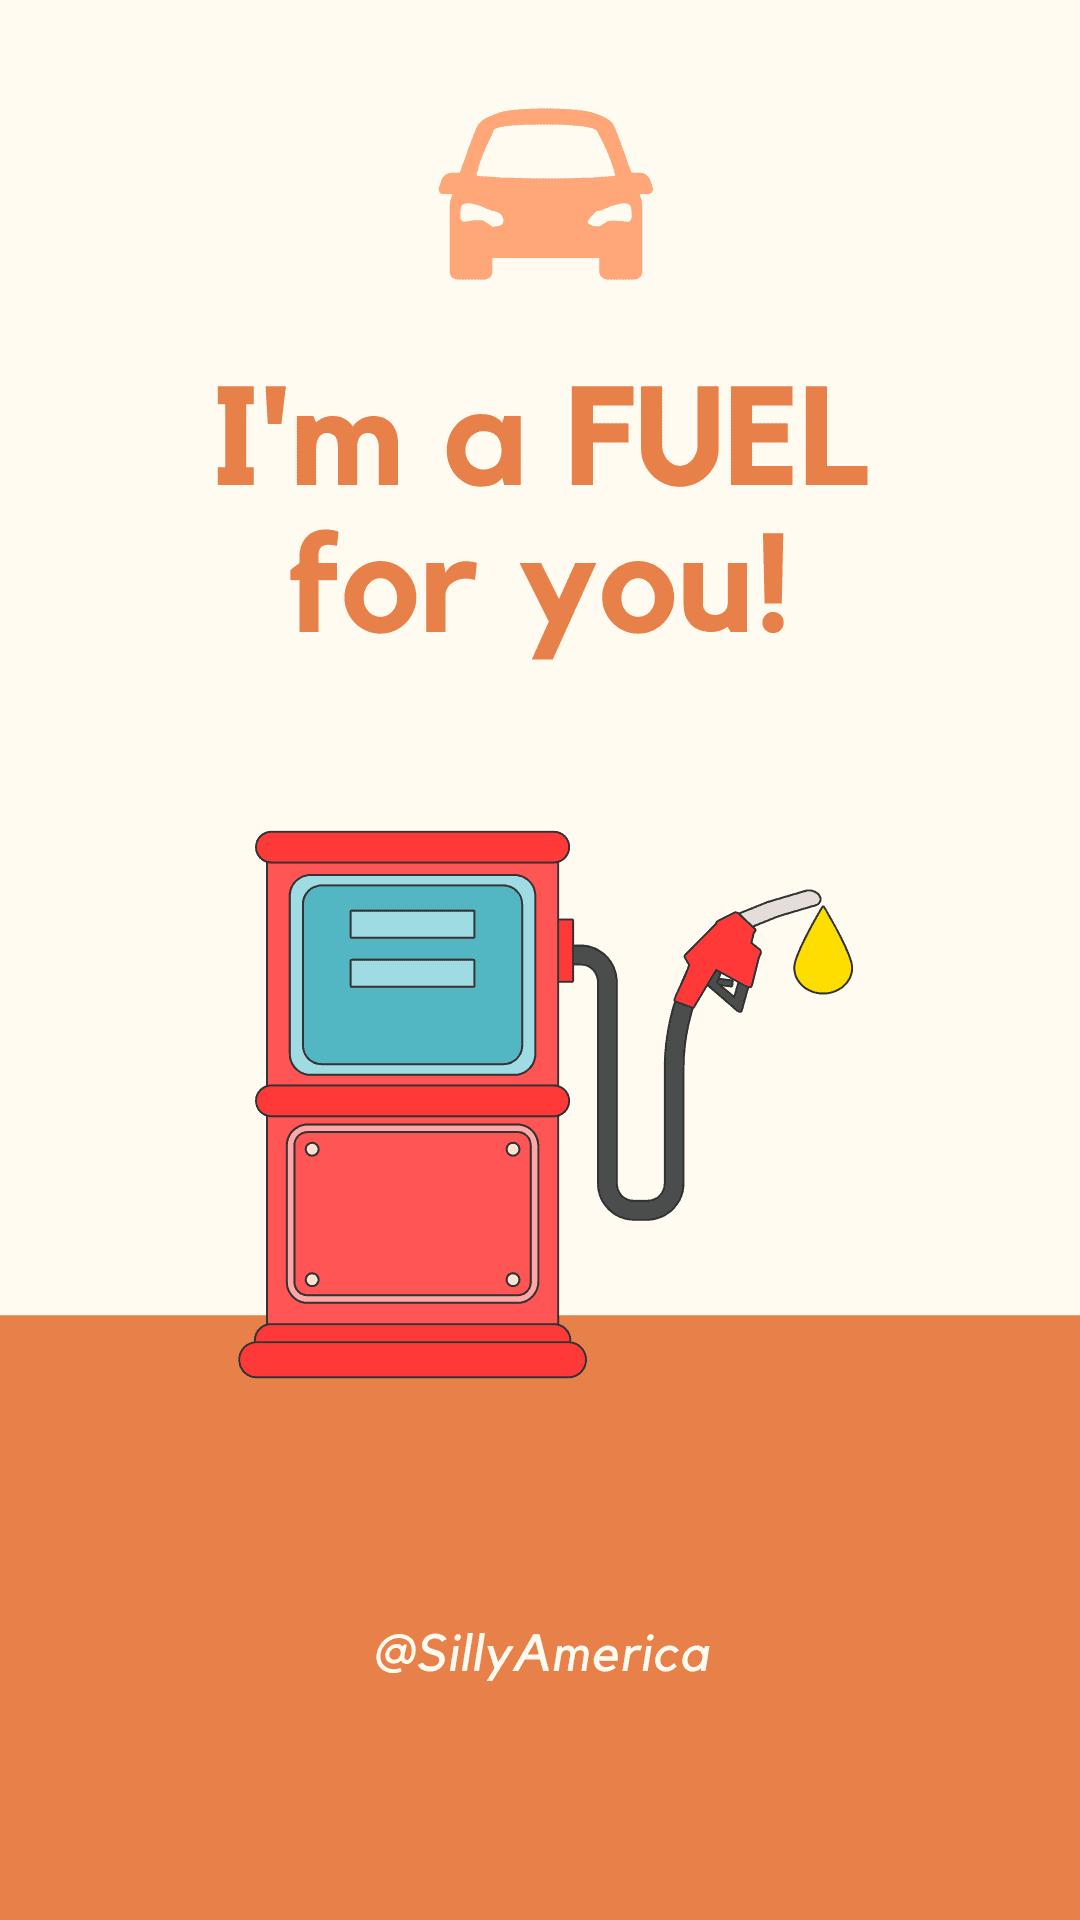 I'm a FUEL for you! - Car Puns to fuel your road trip content!